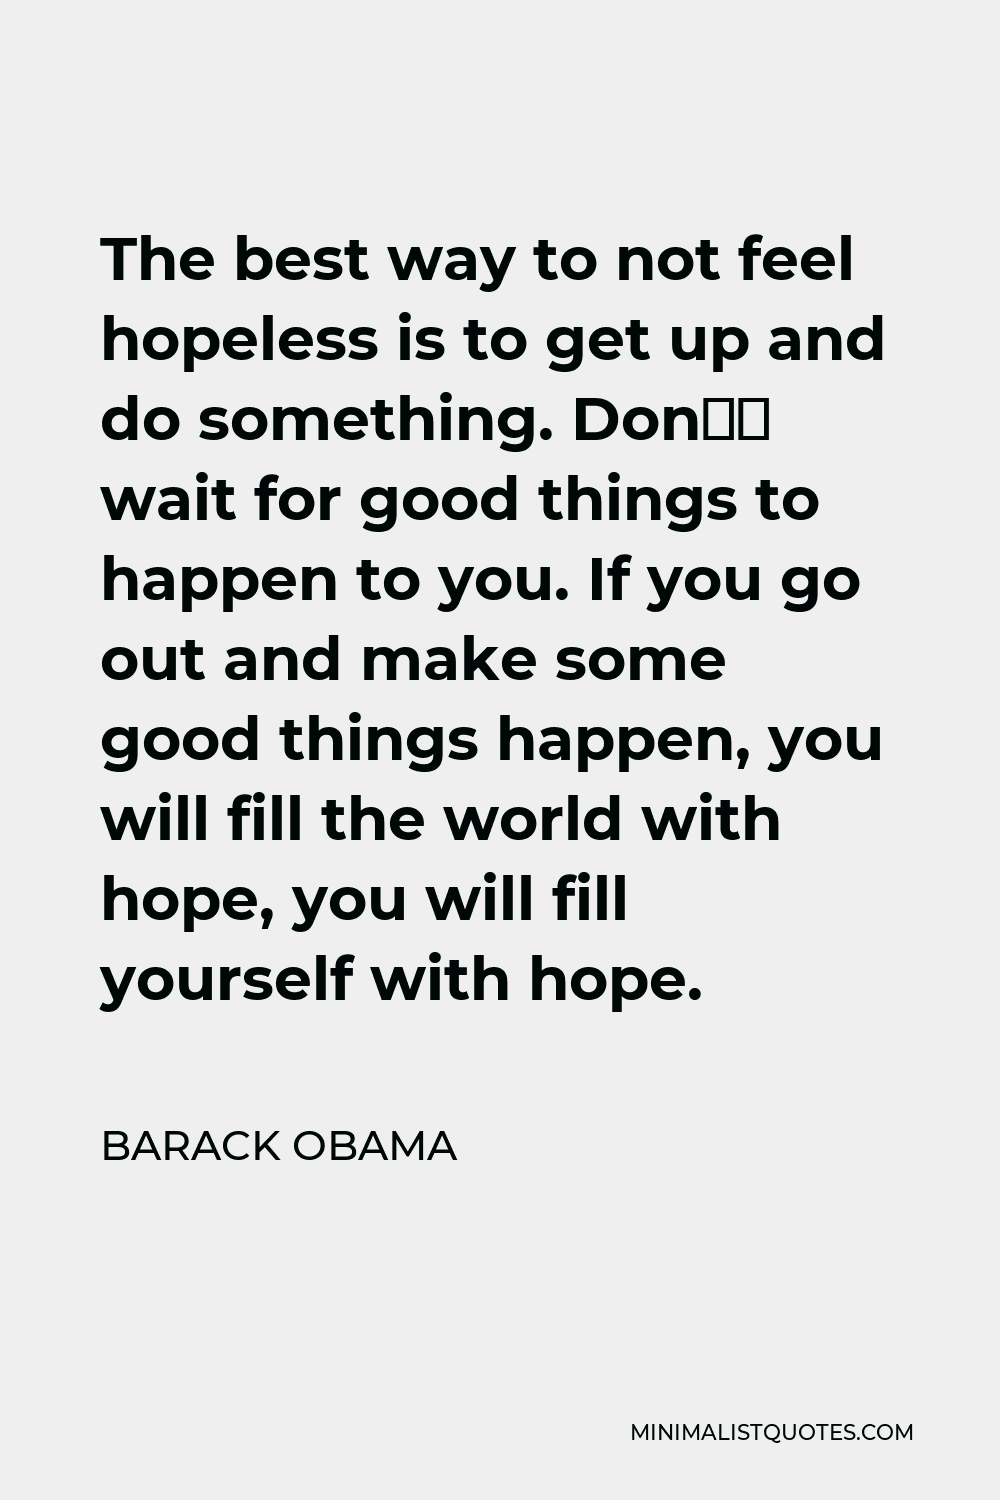 Barack Obama Quote - The best way to not feel hopeless is to get up and do something. Don’t wait for good things to happen to you. If you go out and make some good things happen, you will fill the world with hope, you will fill yourself with hope.